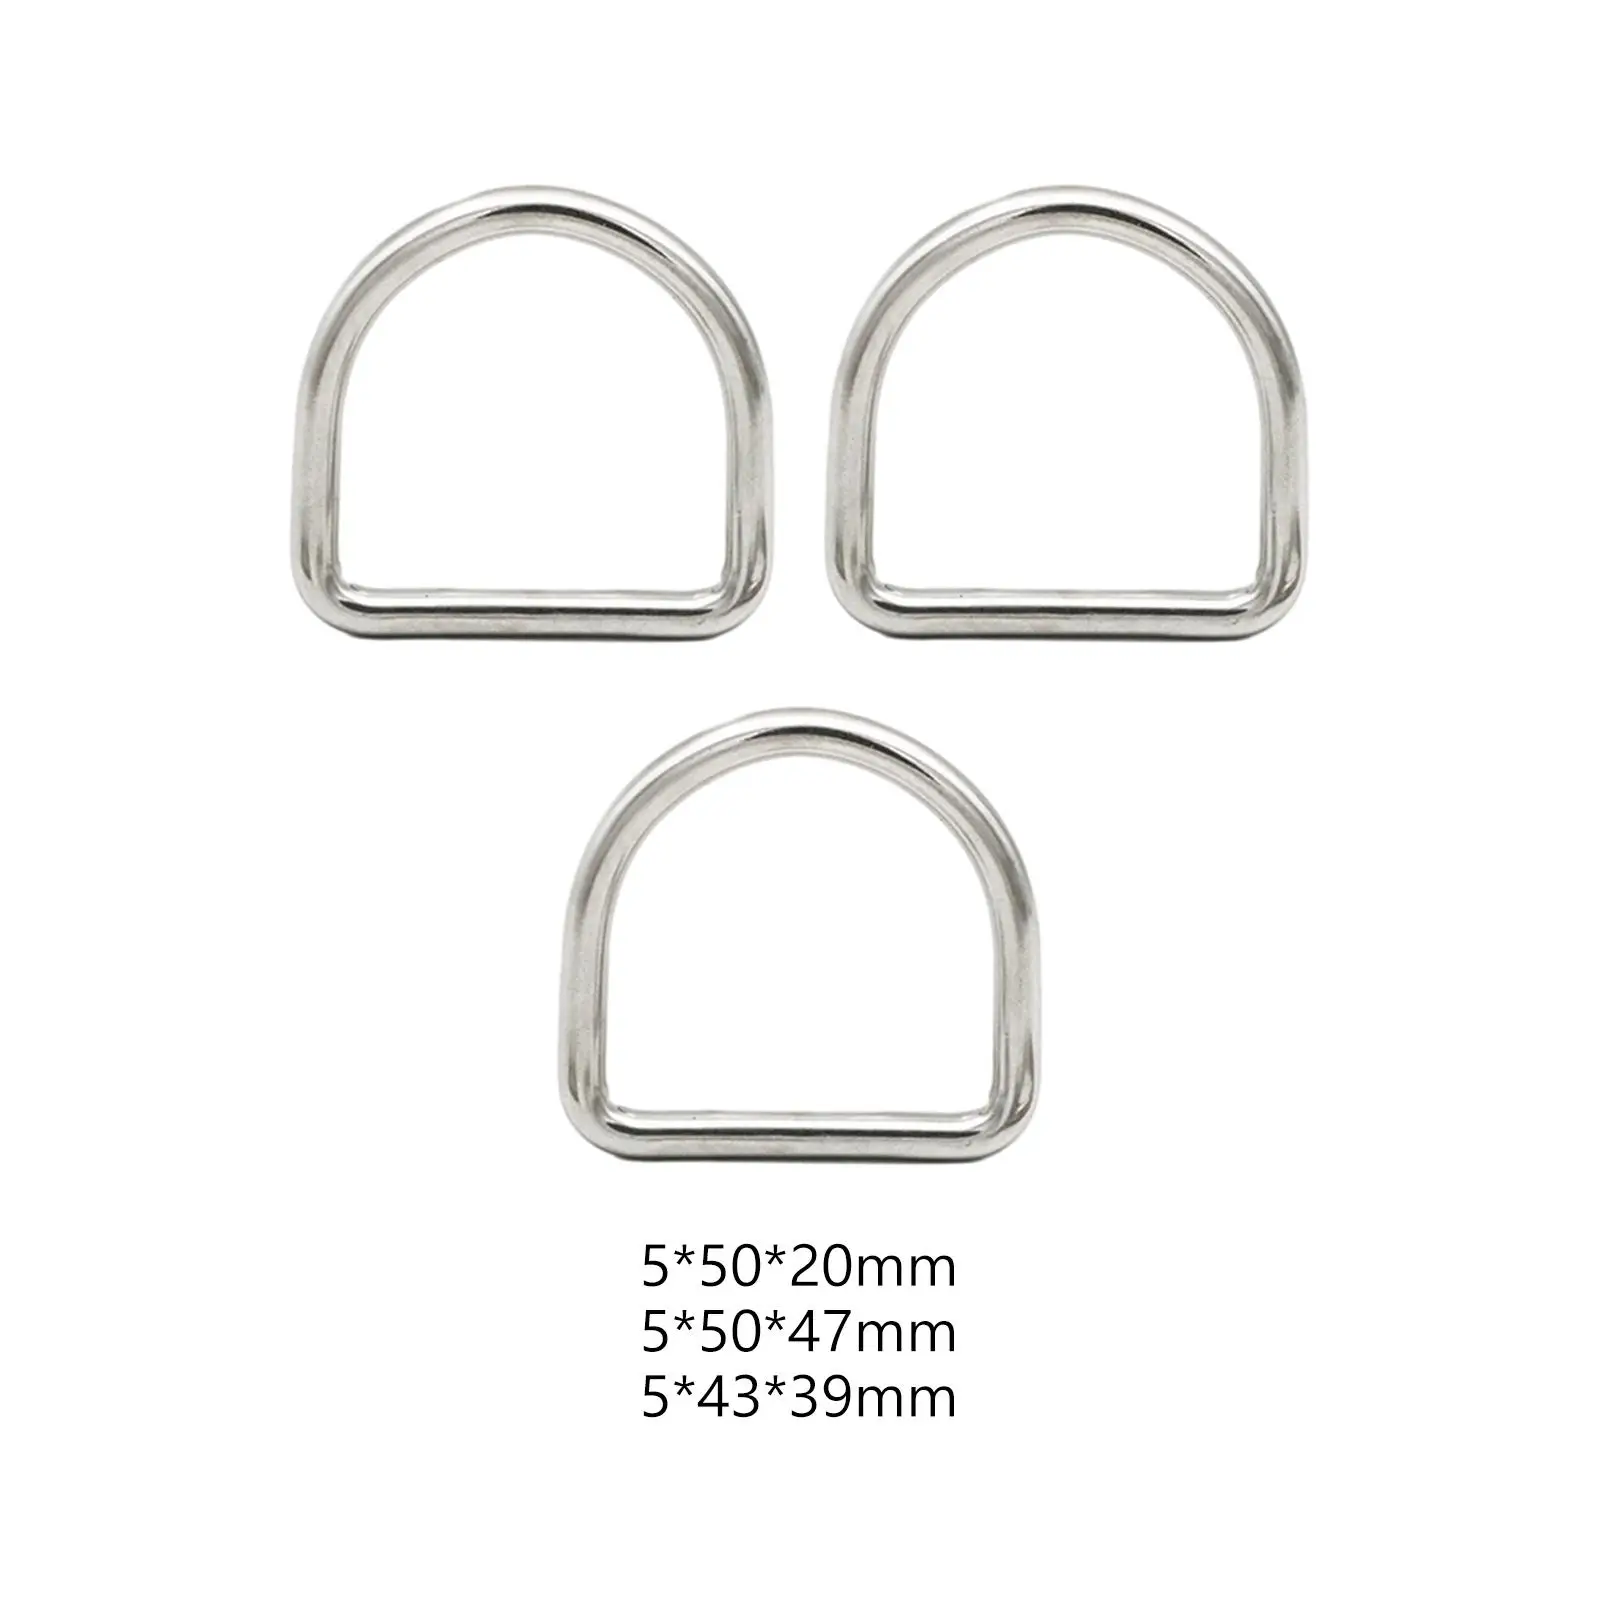 

3x Stainless Steel D Rings Handmade Seamless DIY Accessories D Shape Buckles for Luggage Garment Belt Webbing Purse Backpack